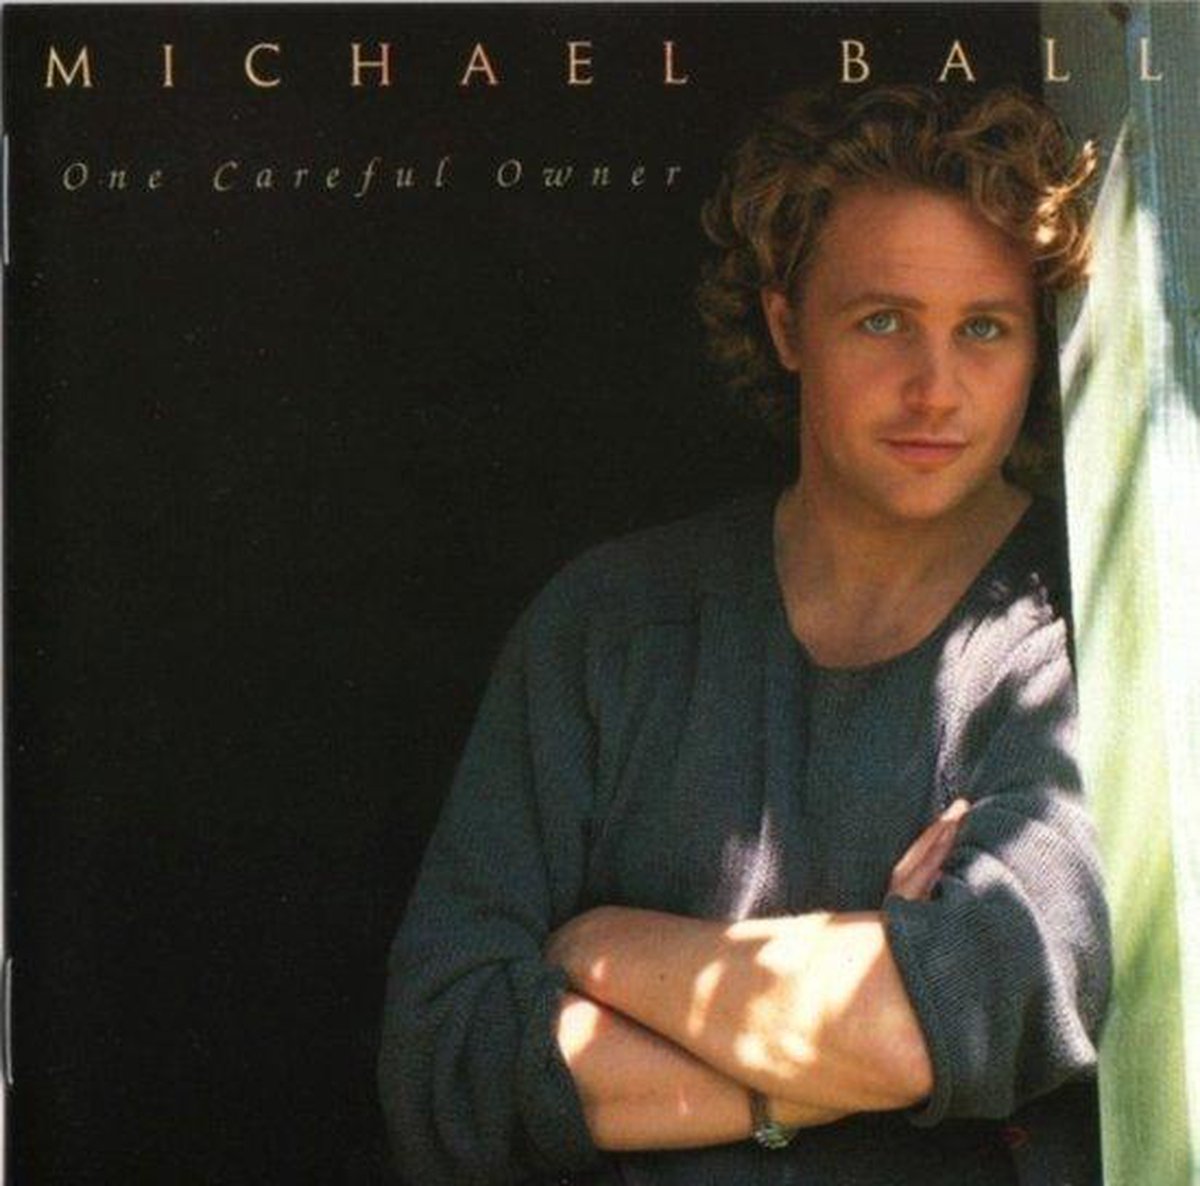 One Careful Owner - Michael Ball